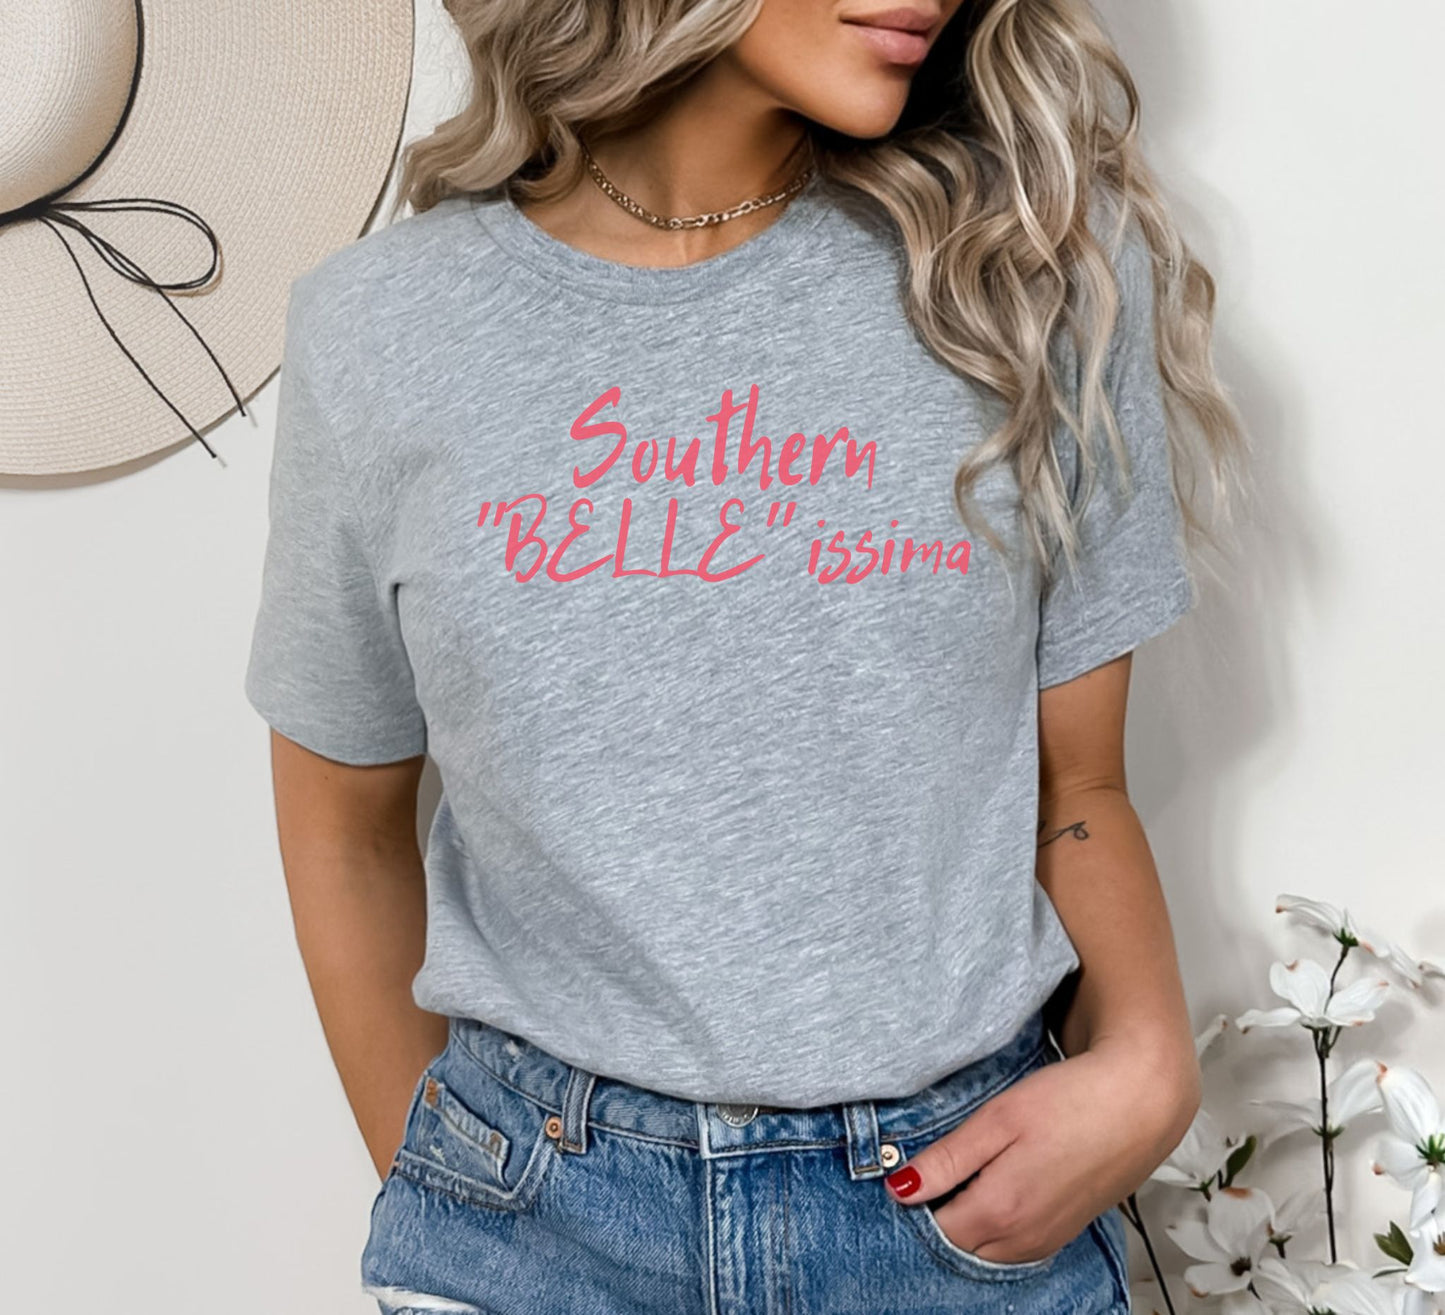 Southern "Belle"issima T-Shirt - Perfectly Pink